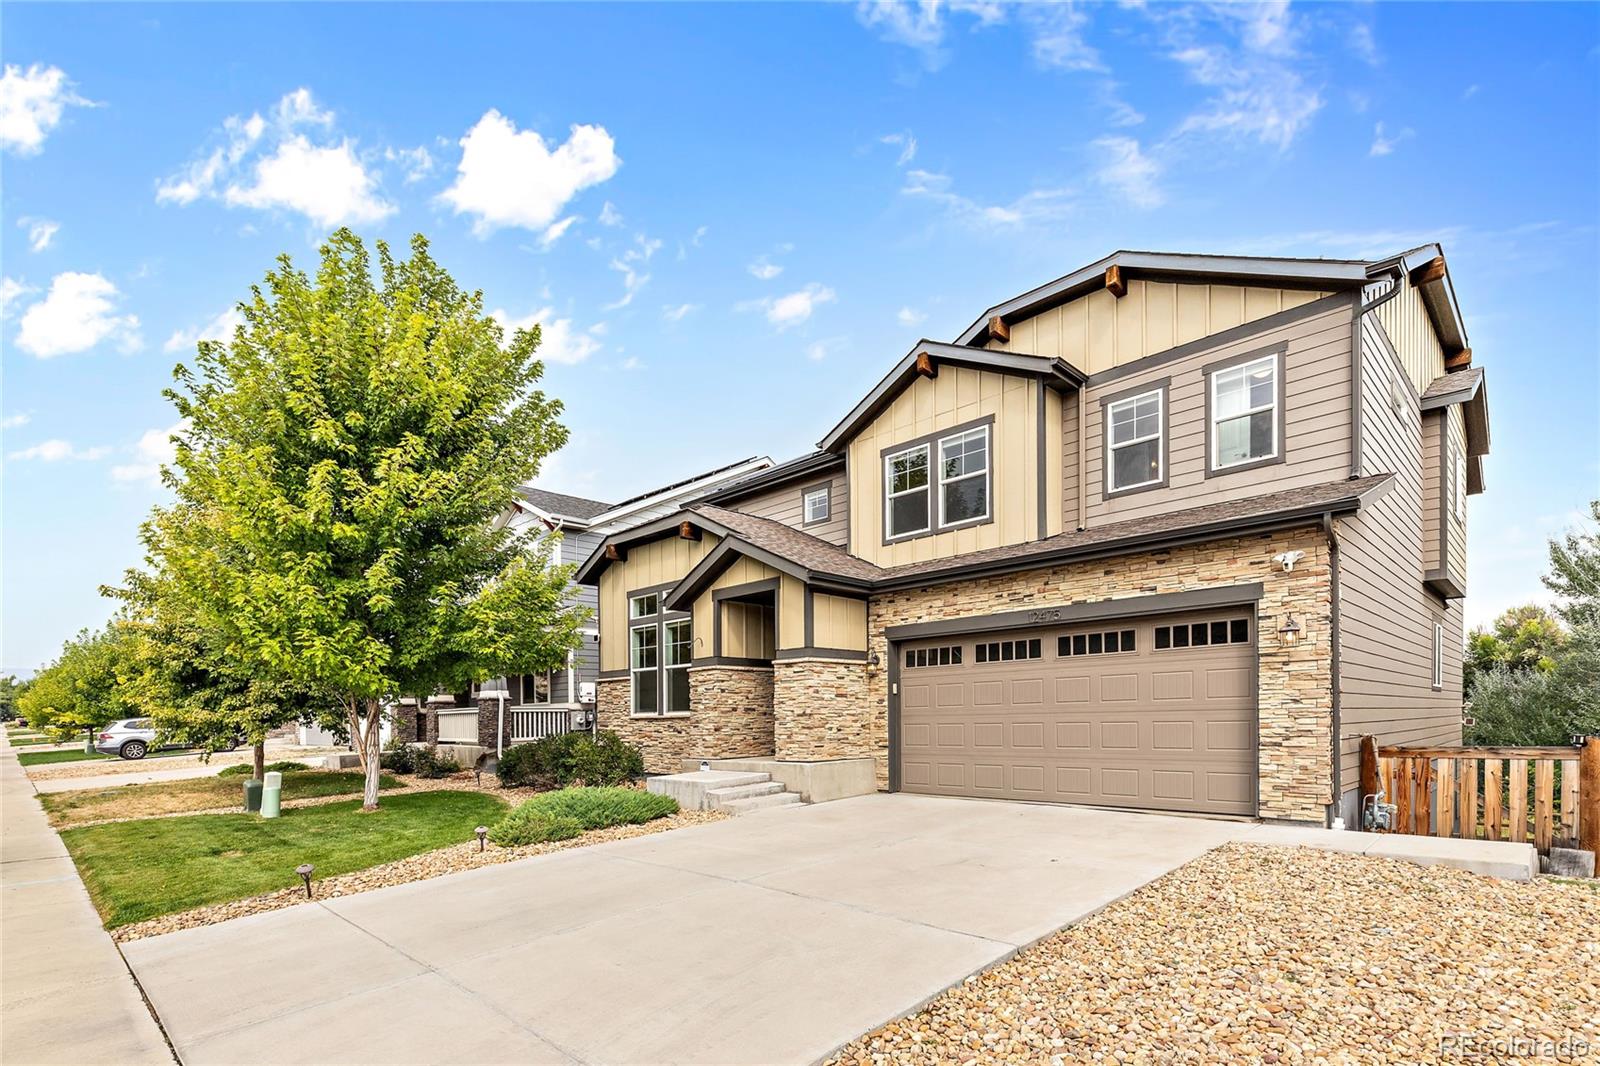 12475 W 8th Place, golden MLS: 5597839 Beds: 5 Baths: 4 Price: $975,000